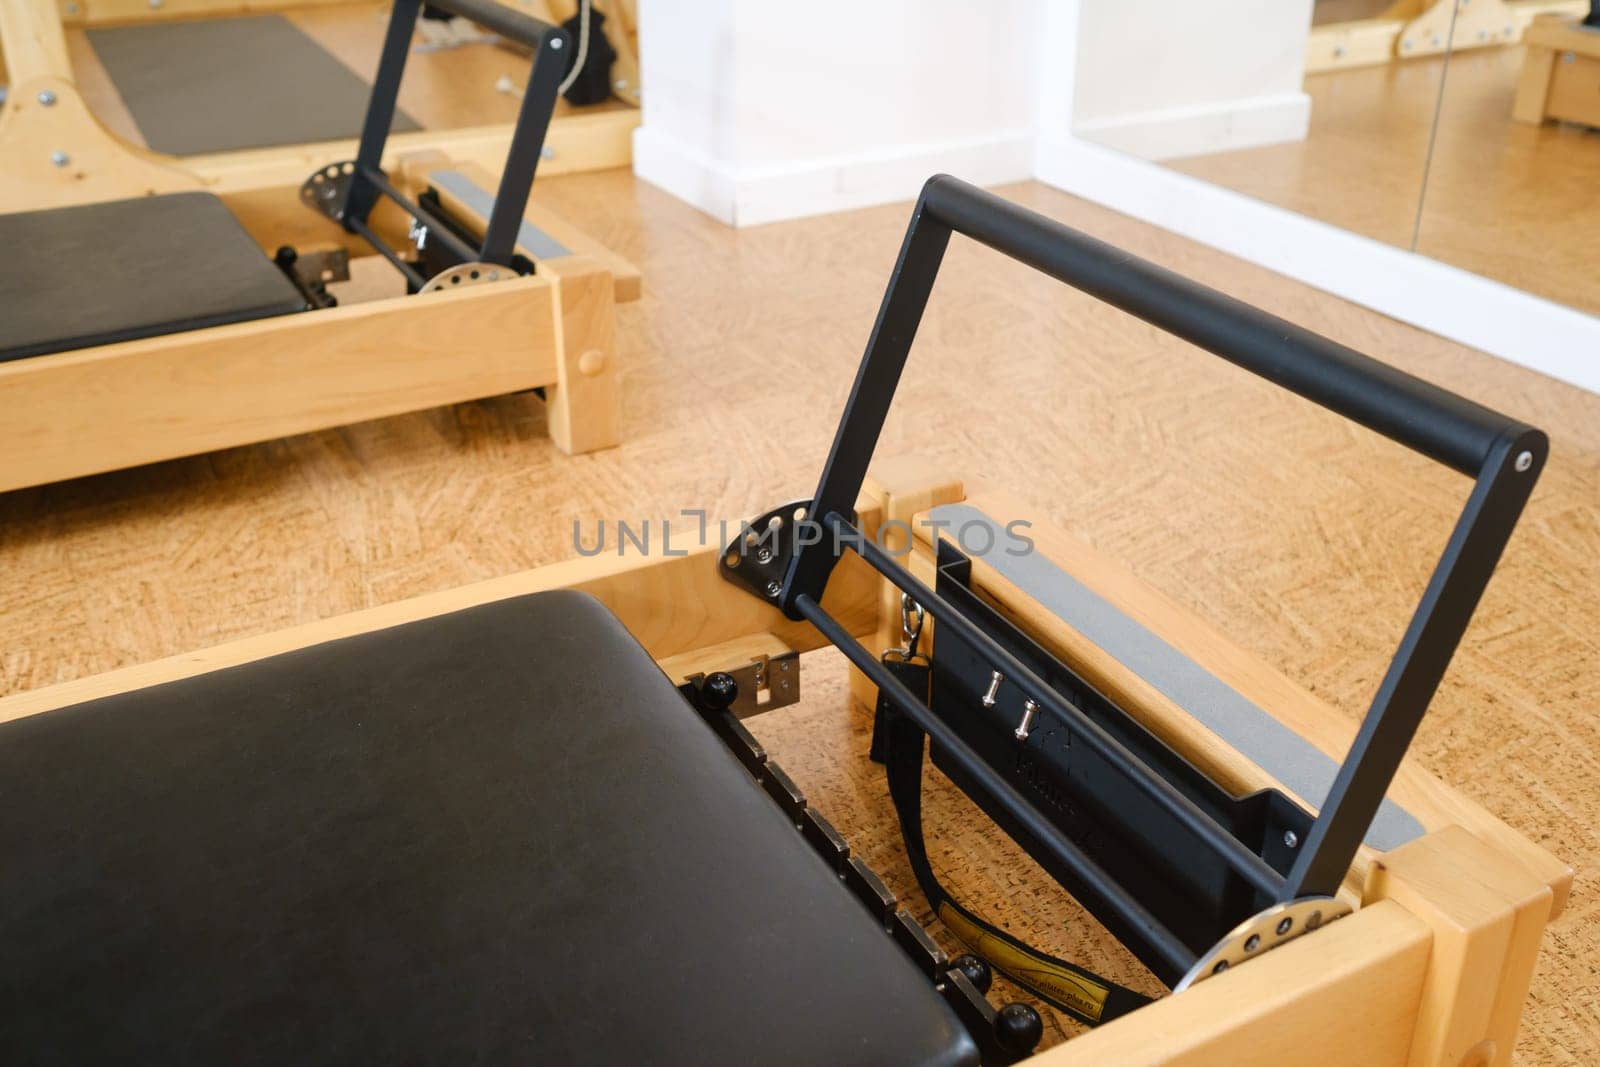 the reformer machine in the pilates room. Yoga equipment by Lobachad